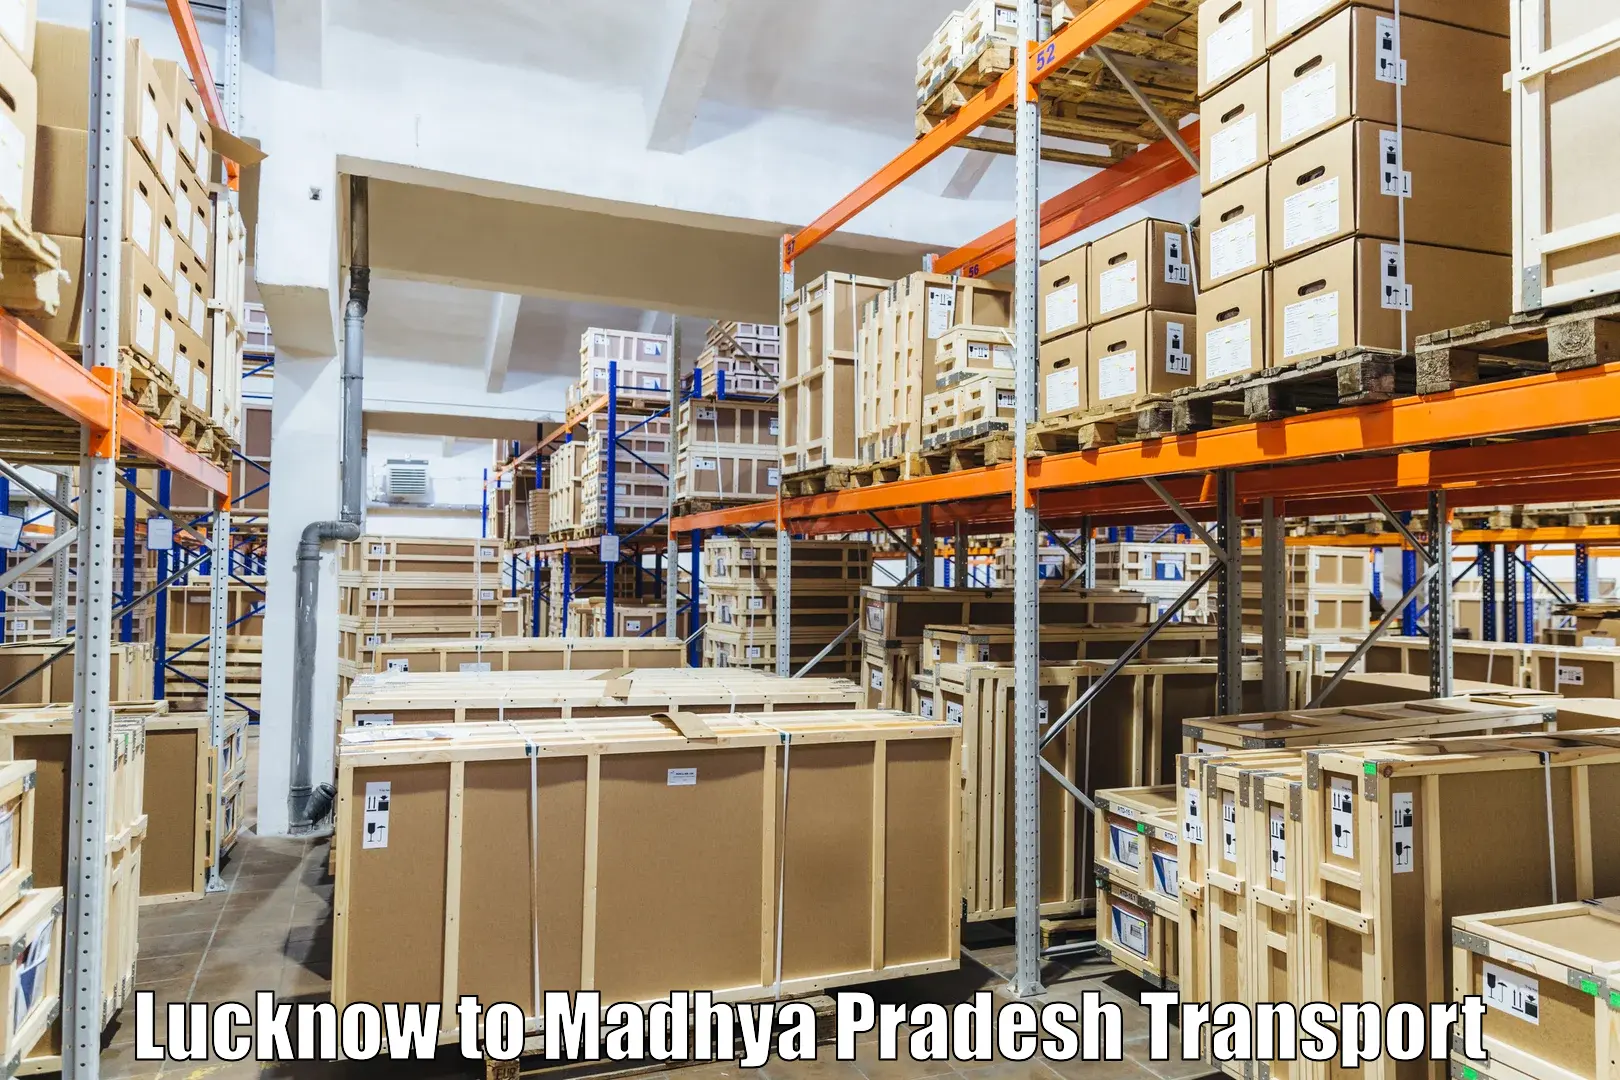 Truck transport companies in India Lucknow to Chhatarpur